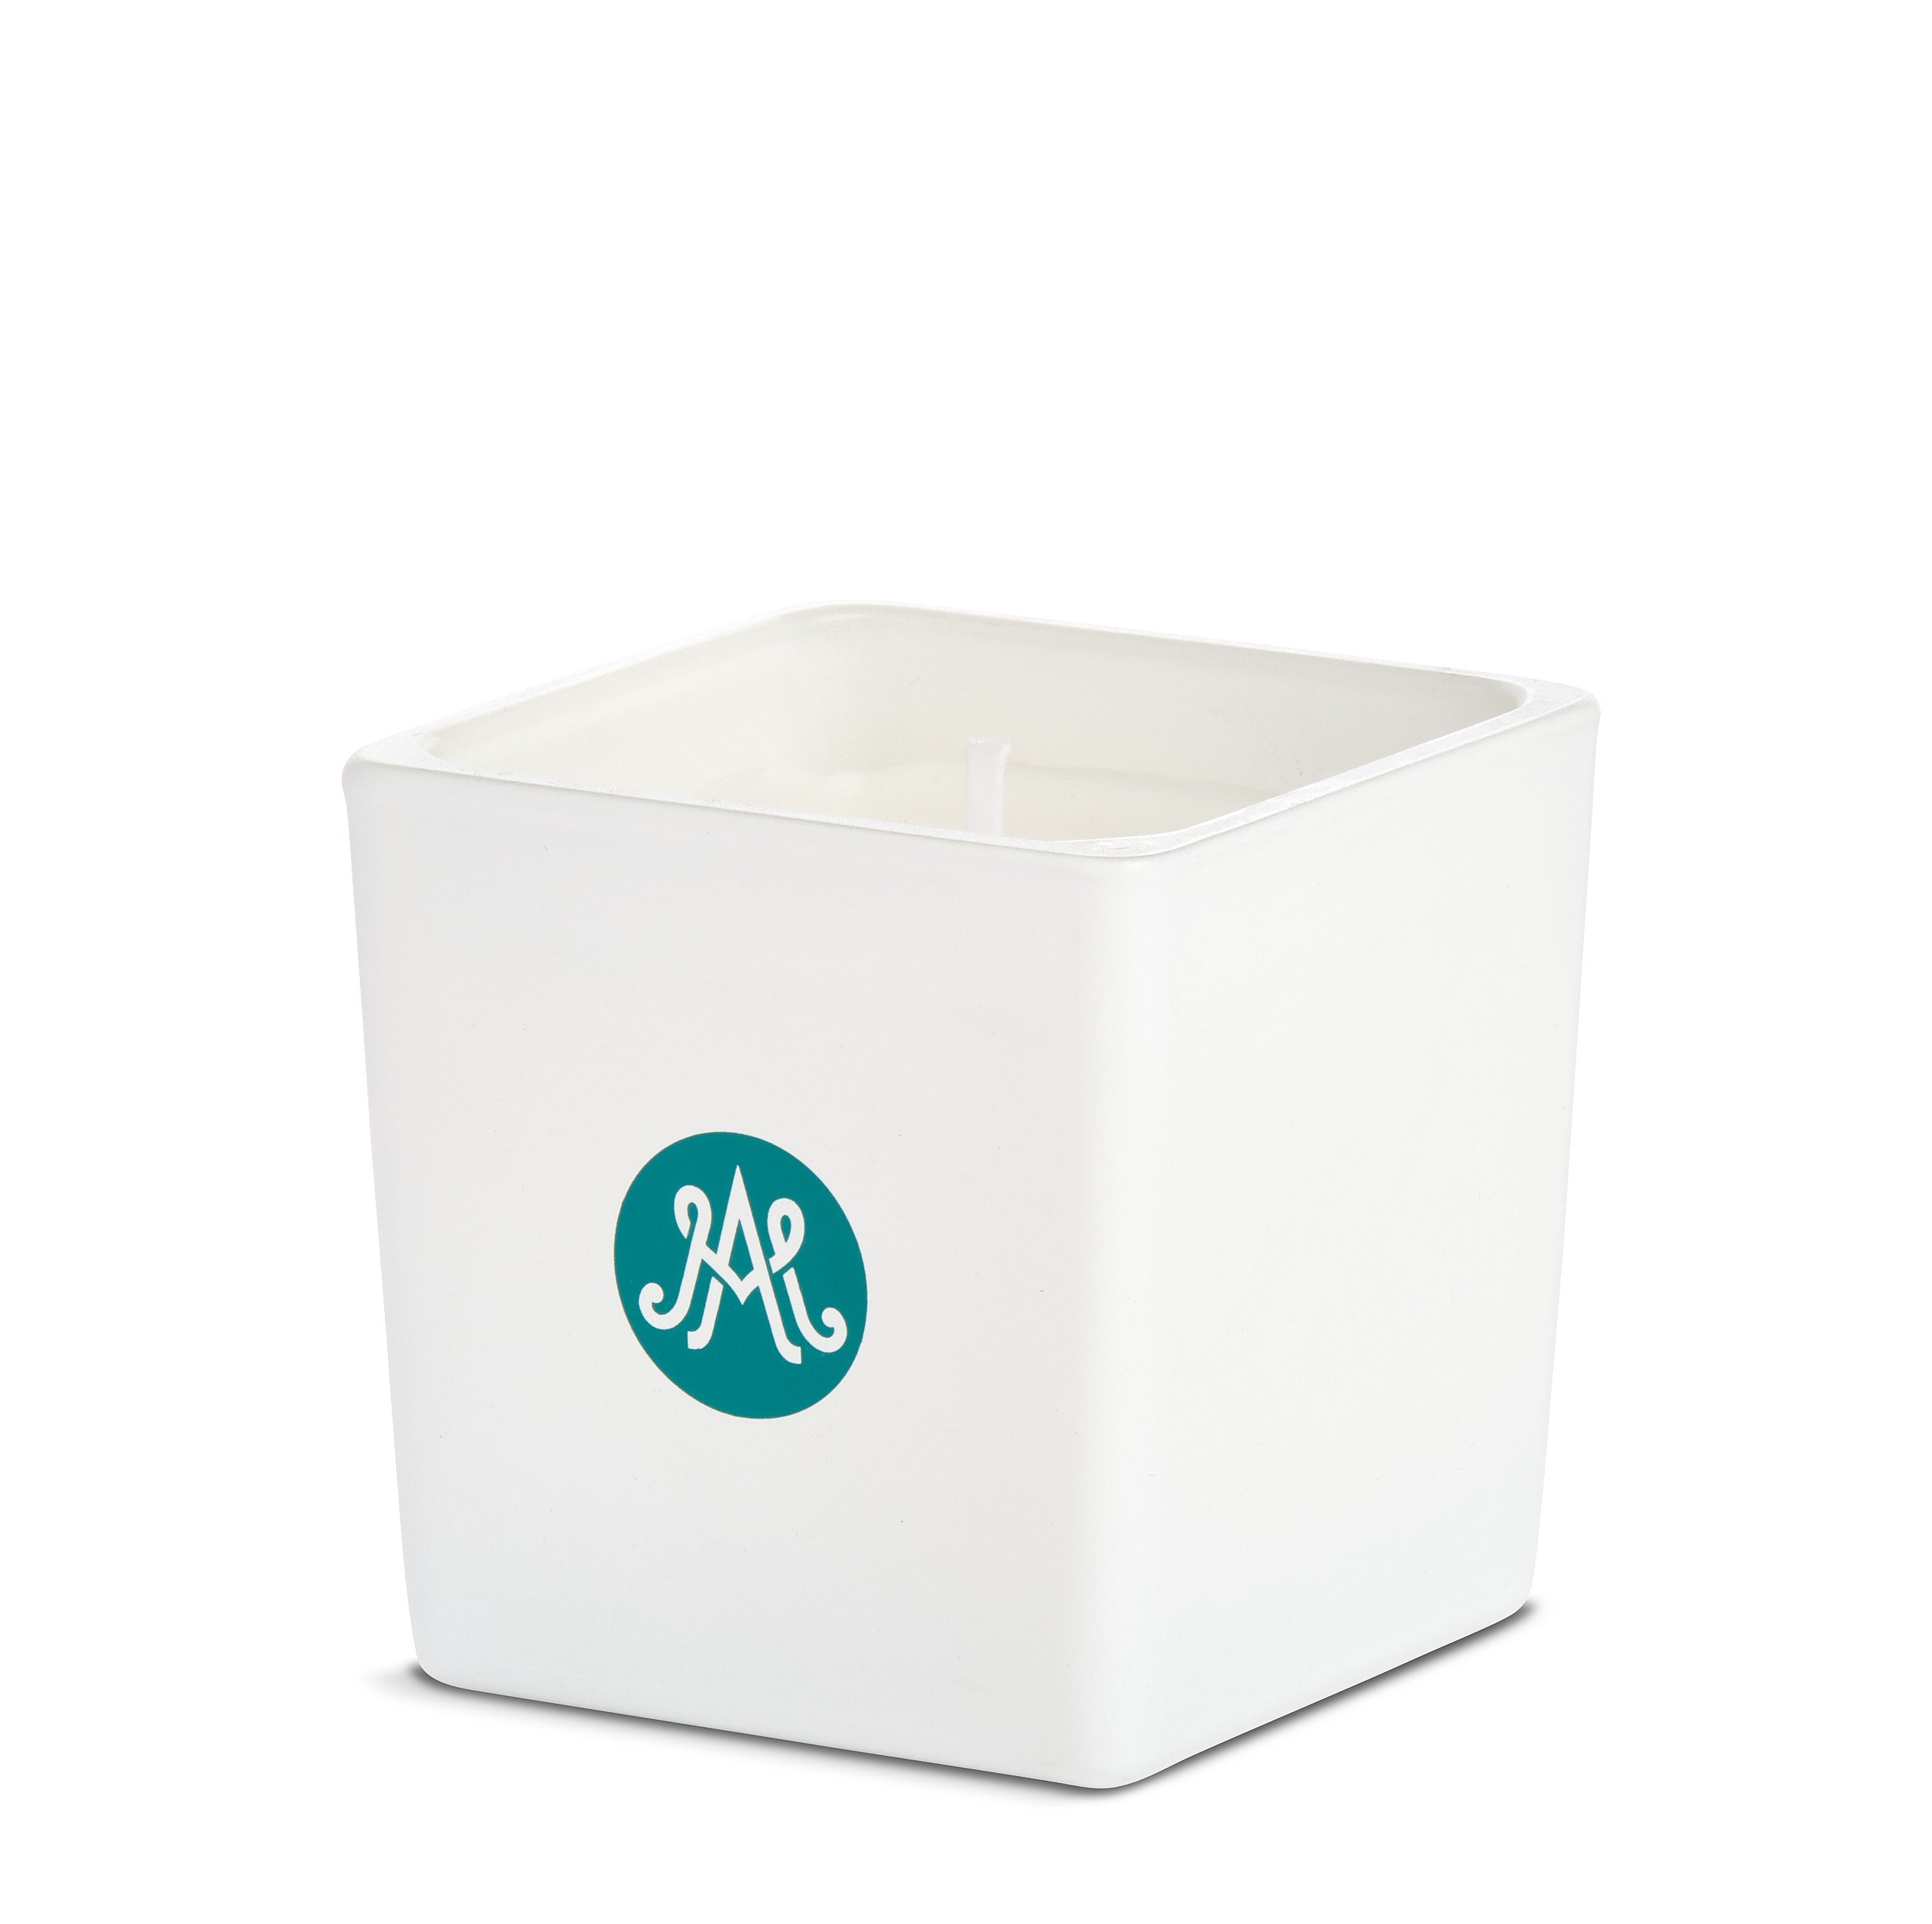 VIII THEA CITRUS- Scented Candle  80g